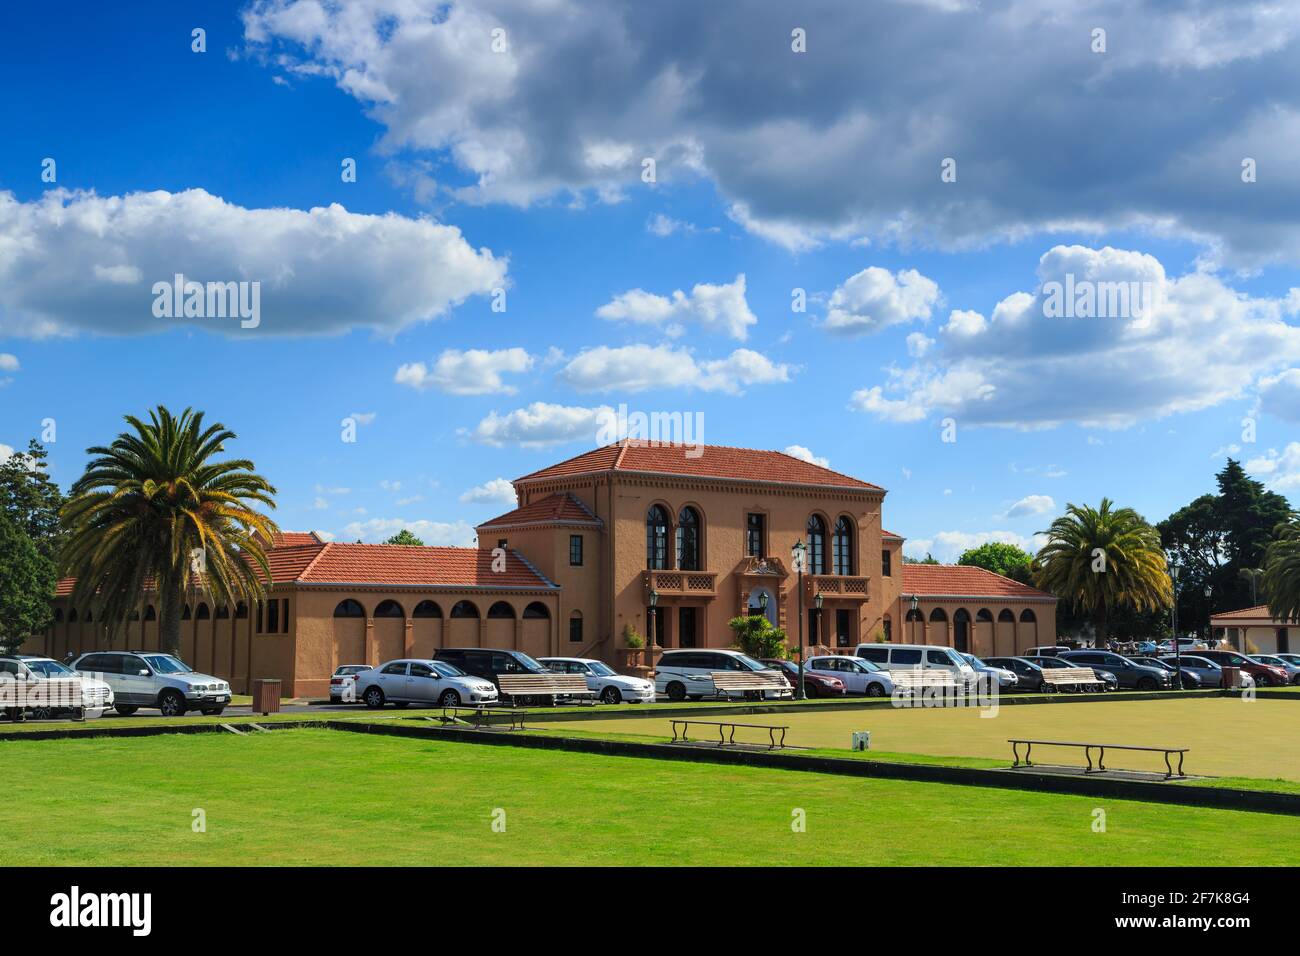 The historic Blue Baths building (1933) in Government Gardens, Rotorua, New Zealand Stock Photo